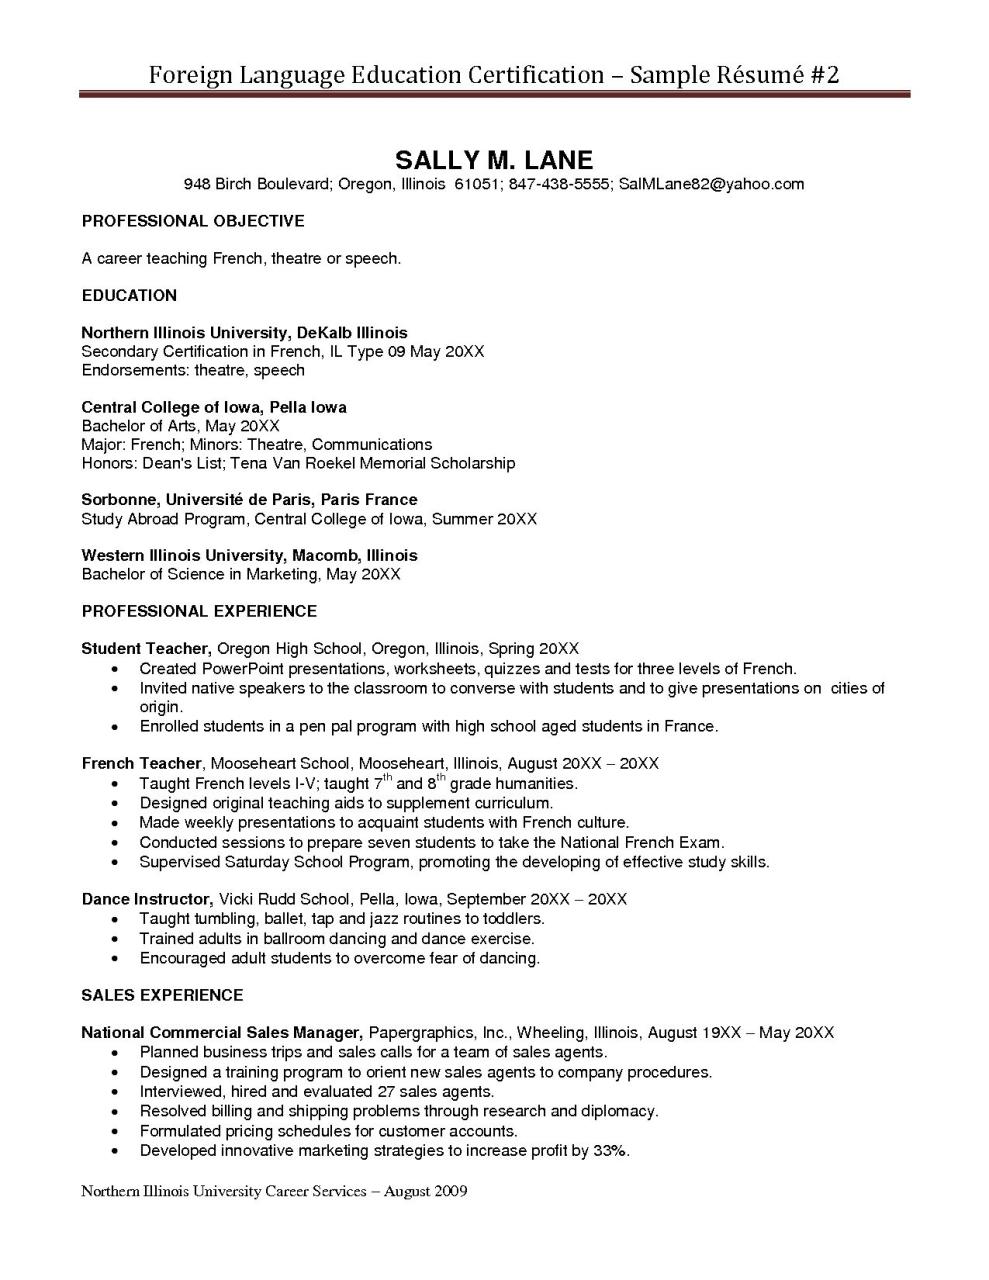 Example Of Resume With Certification How to List Certifications on a